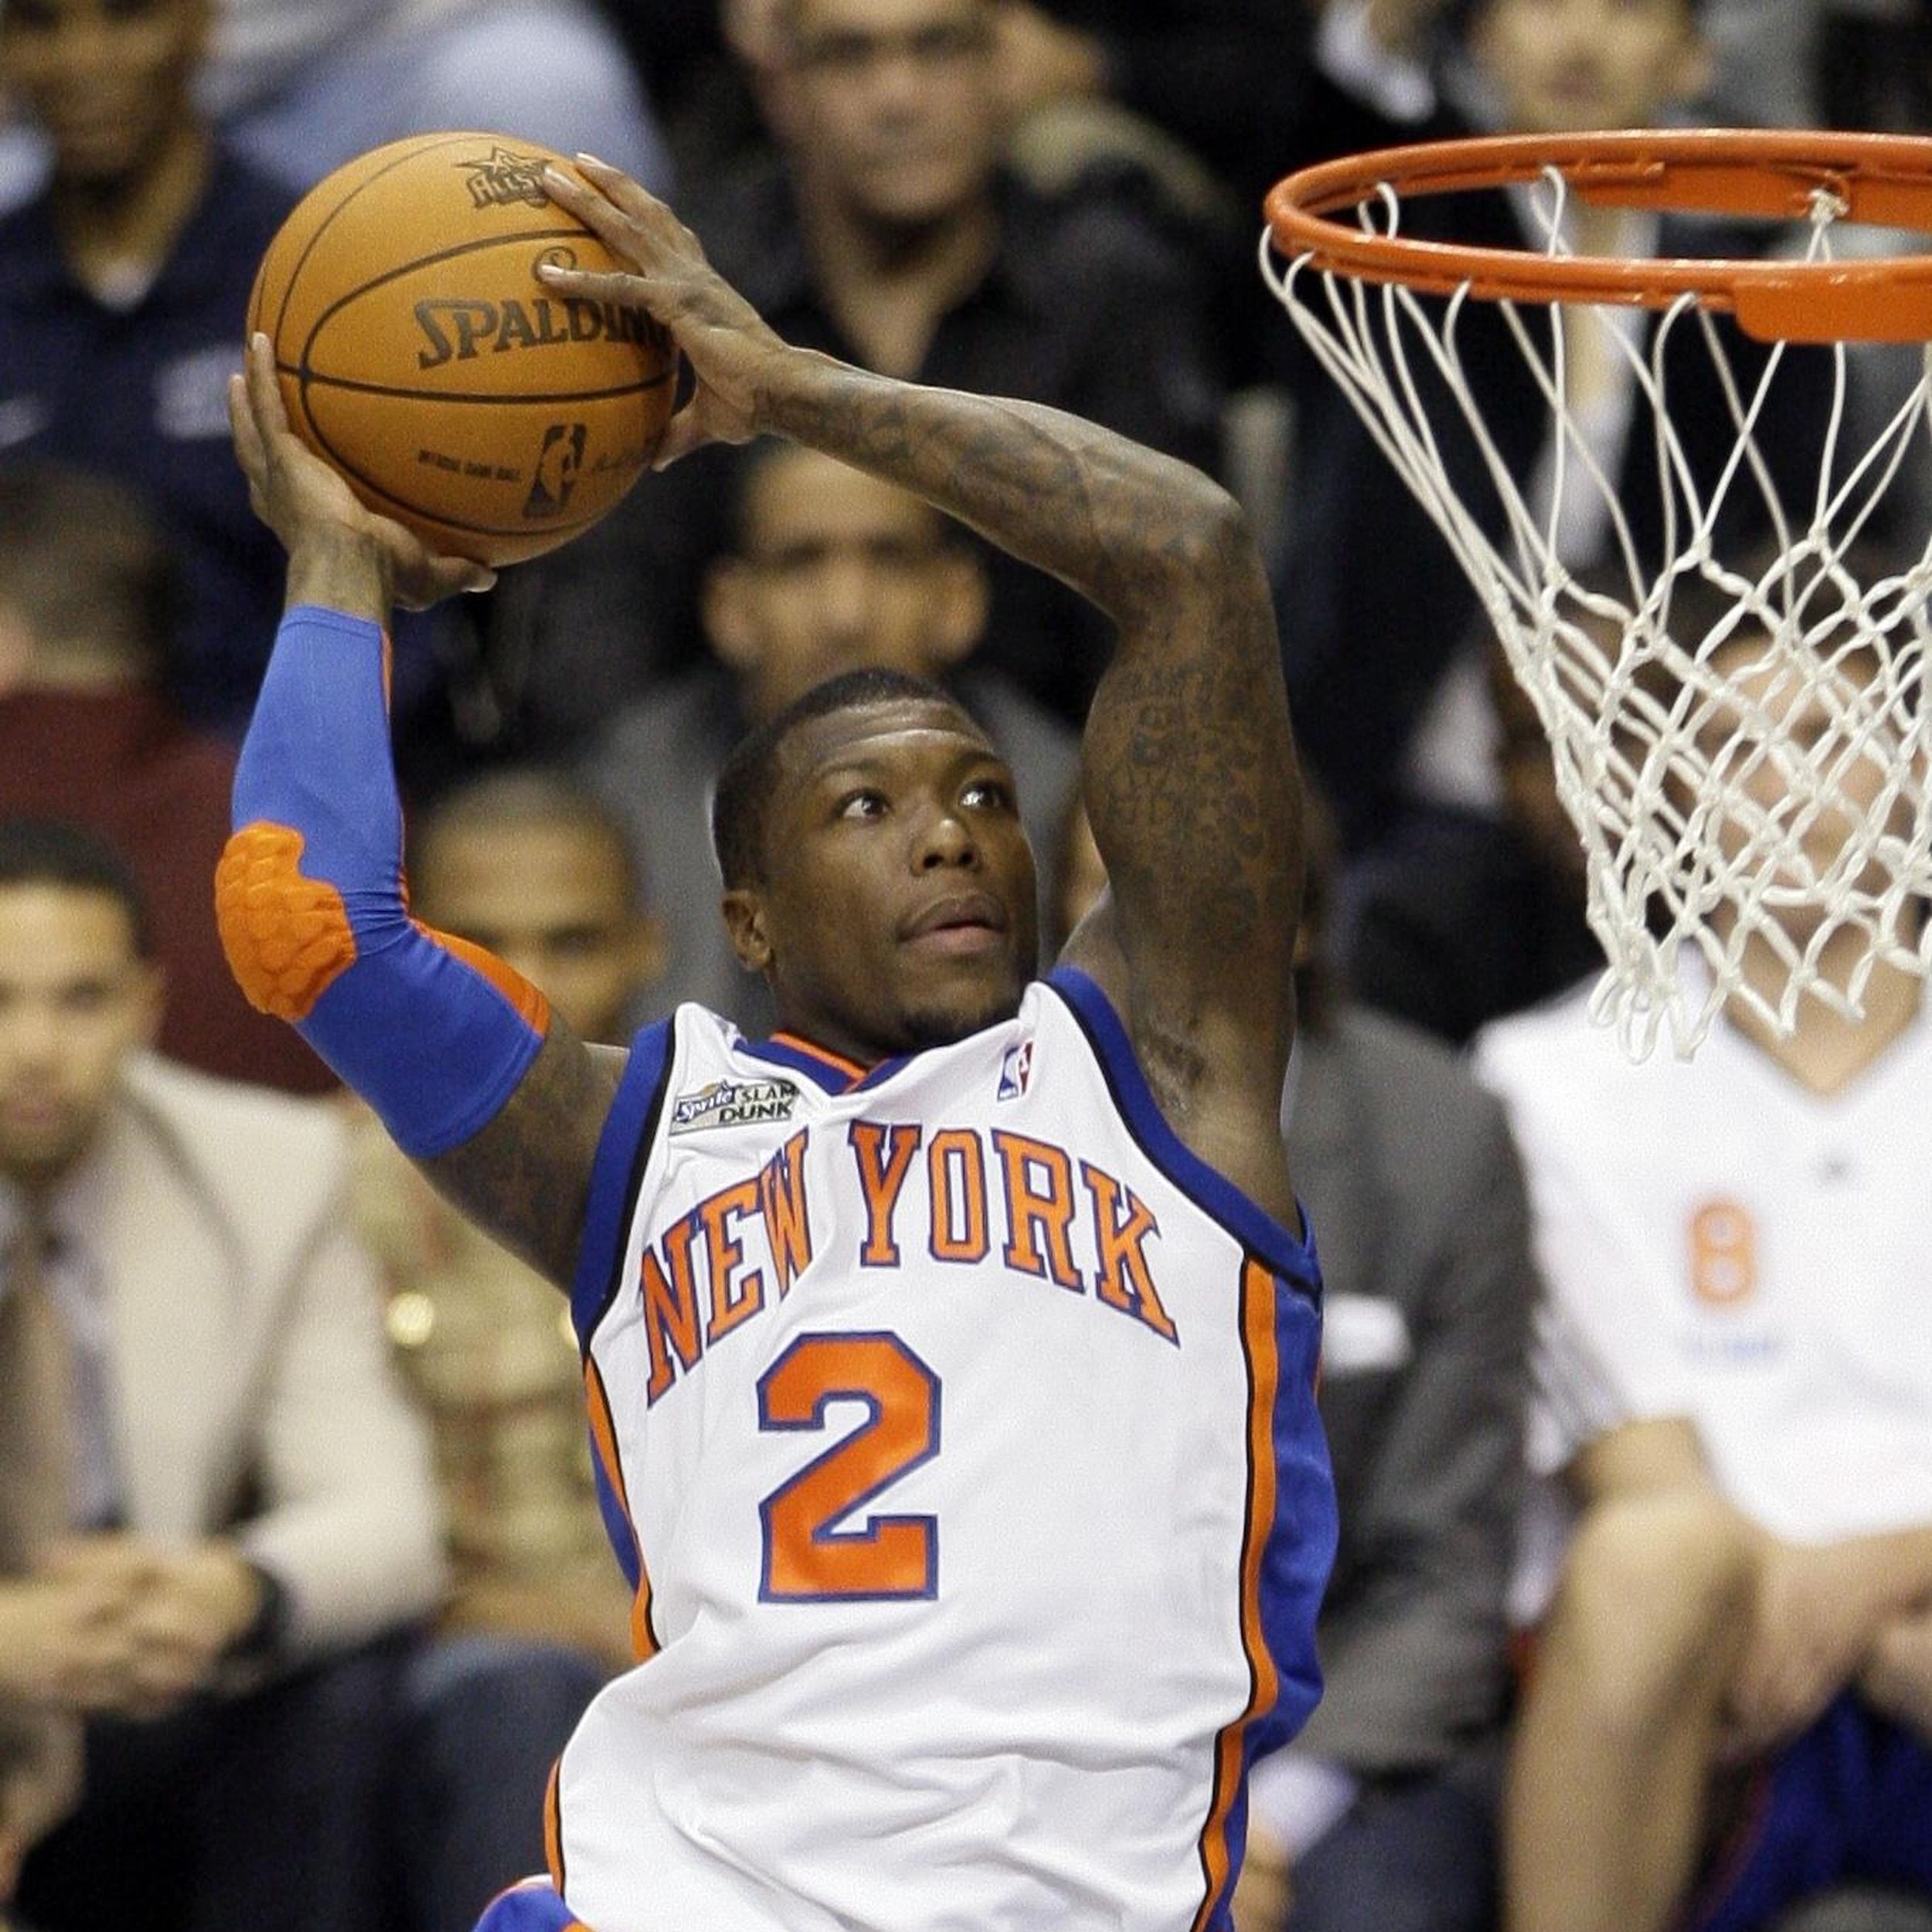 Former UW, NBA hoops star Nate Robinson tries out for Seahawks